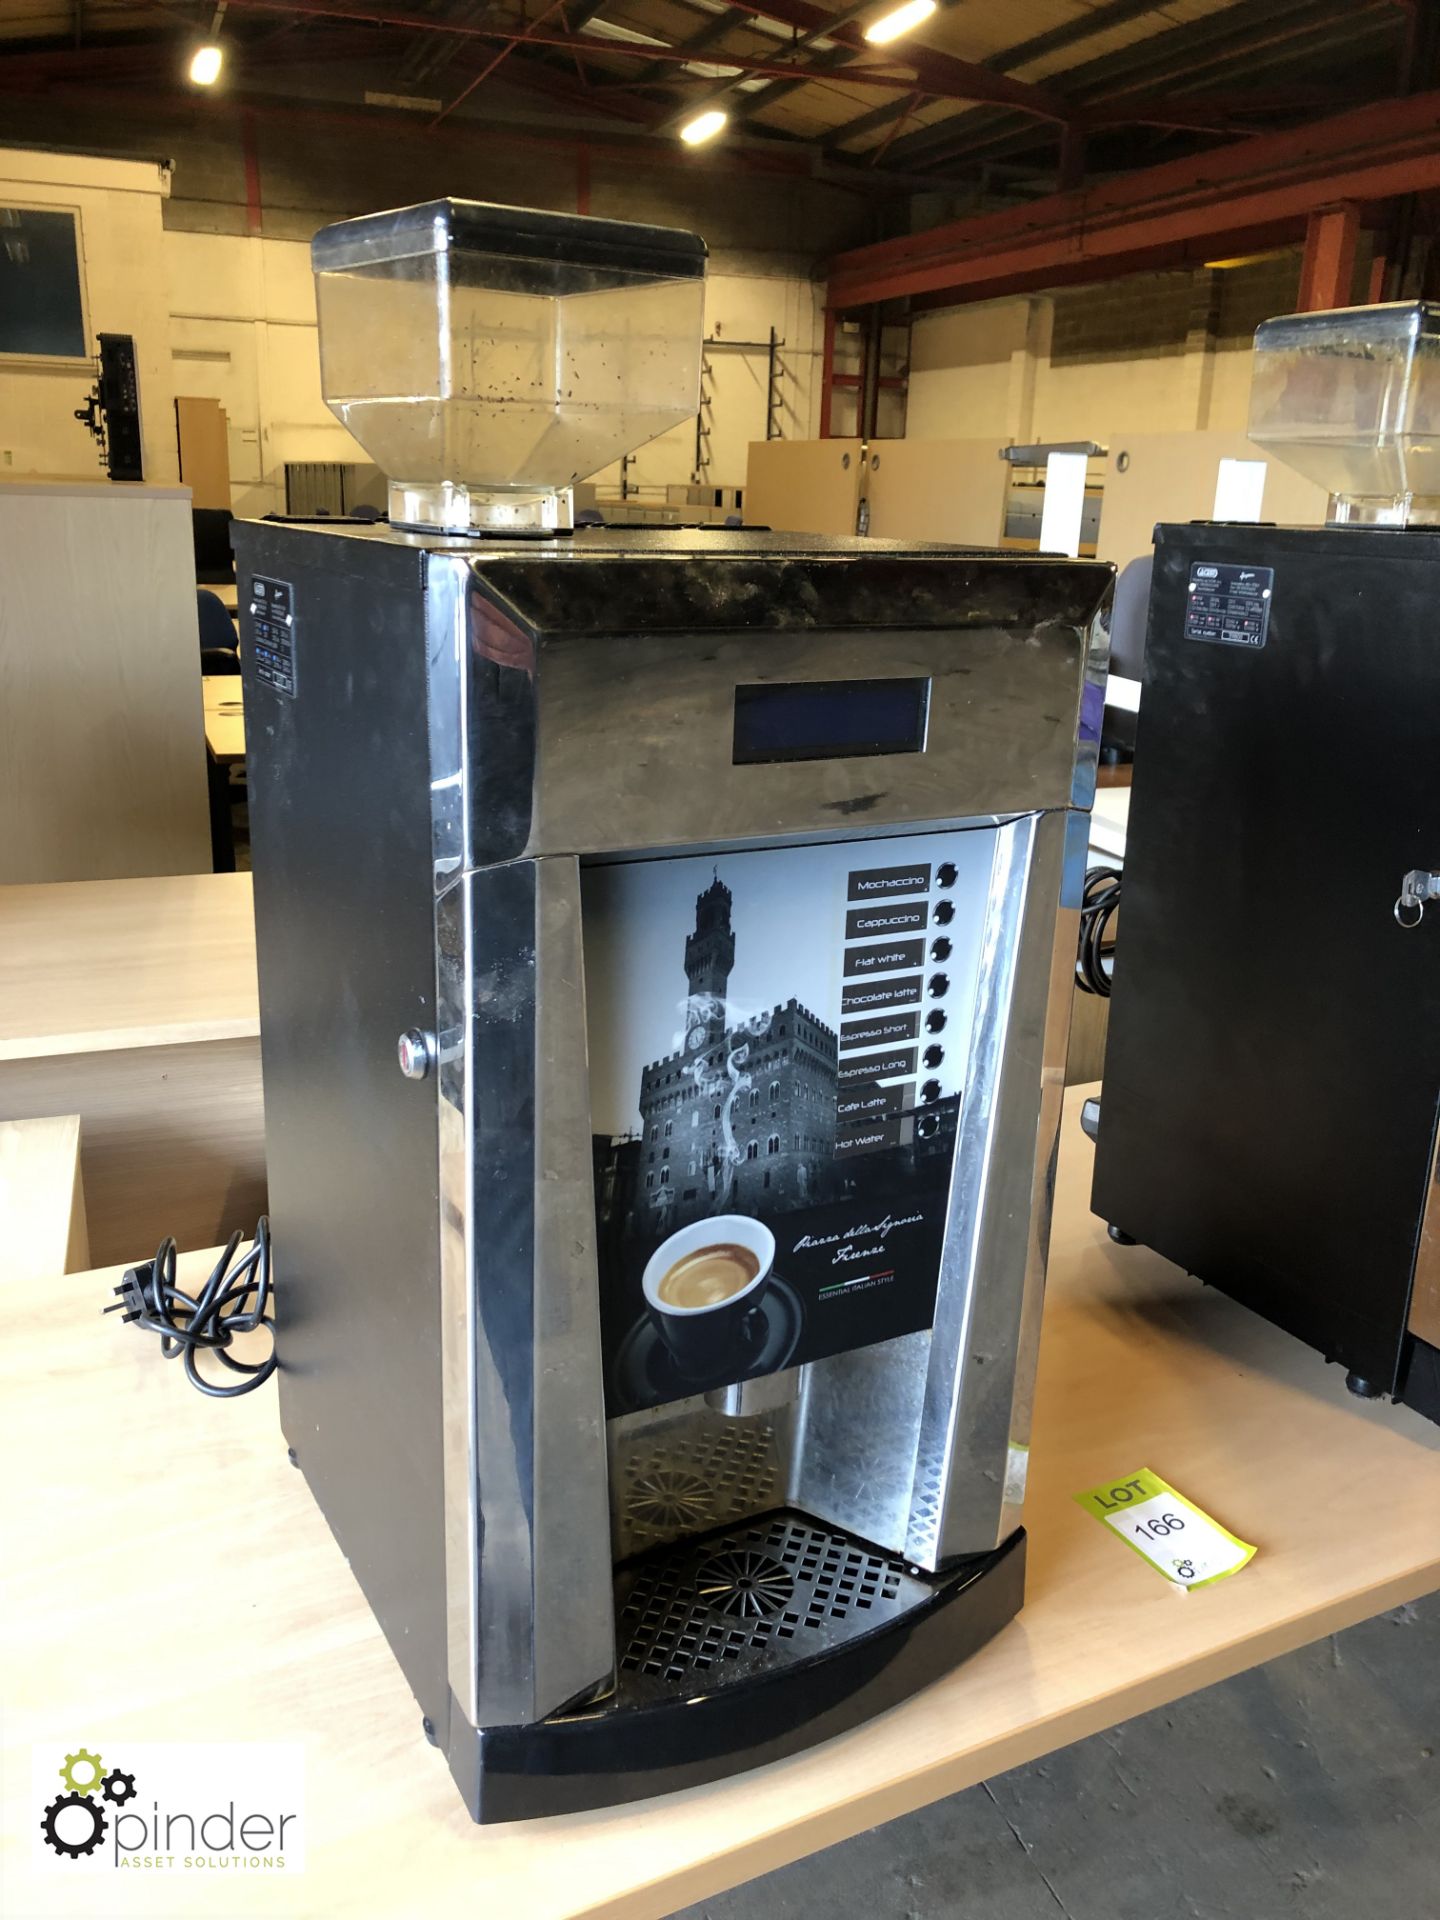 Acom Illymax FO50 Coffee Machine, serial number 34 - Image 2 of 4